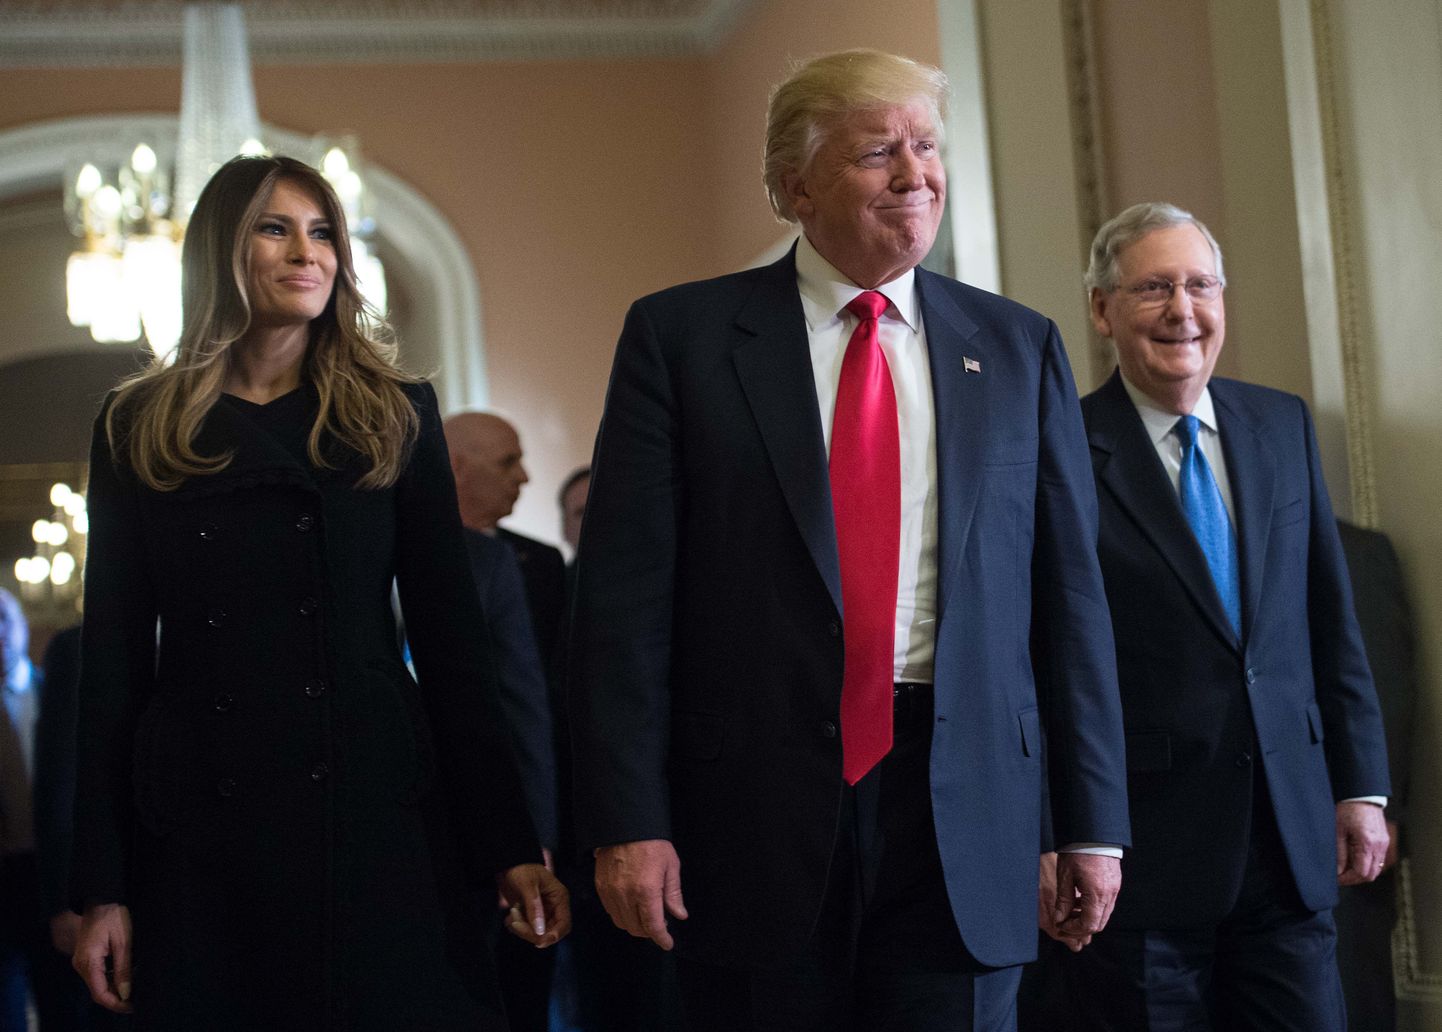 US President-elect Donald Trump and his wife Melania walk with Senate Majority Leader Mitch McConnell (R) following a meeting at the Capitol in Washington, DC, on November 10, 2016. / AFP PHOTO / NICHOLAS KAMM